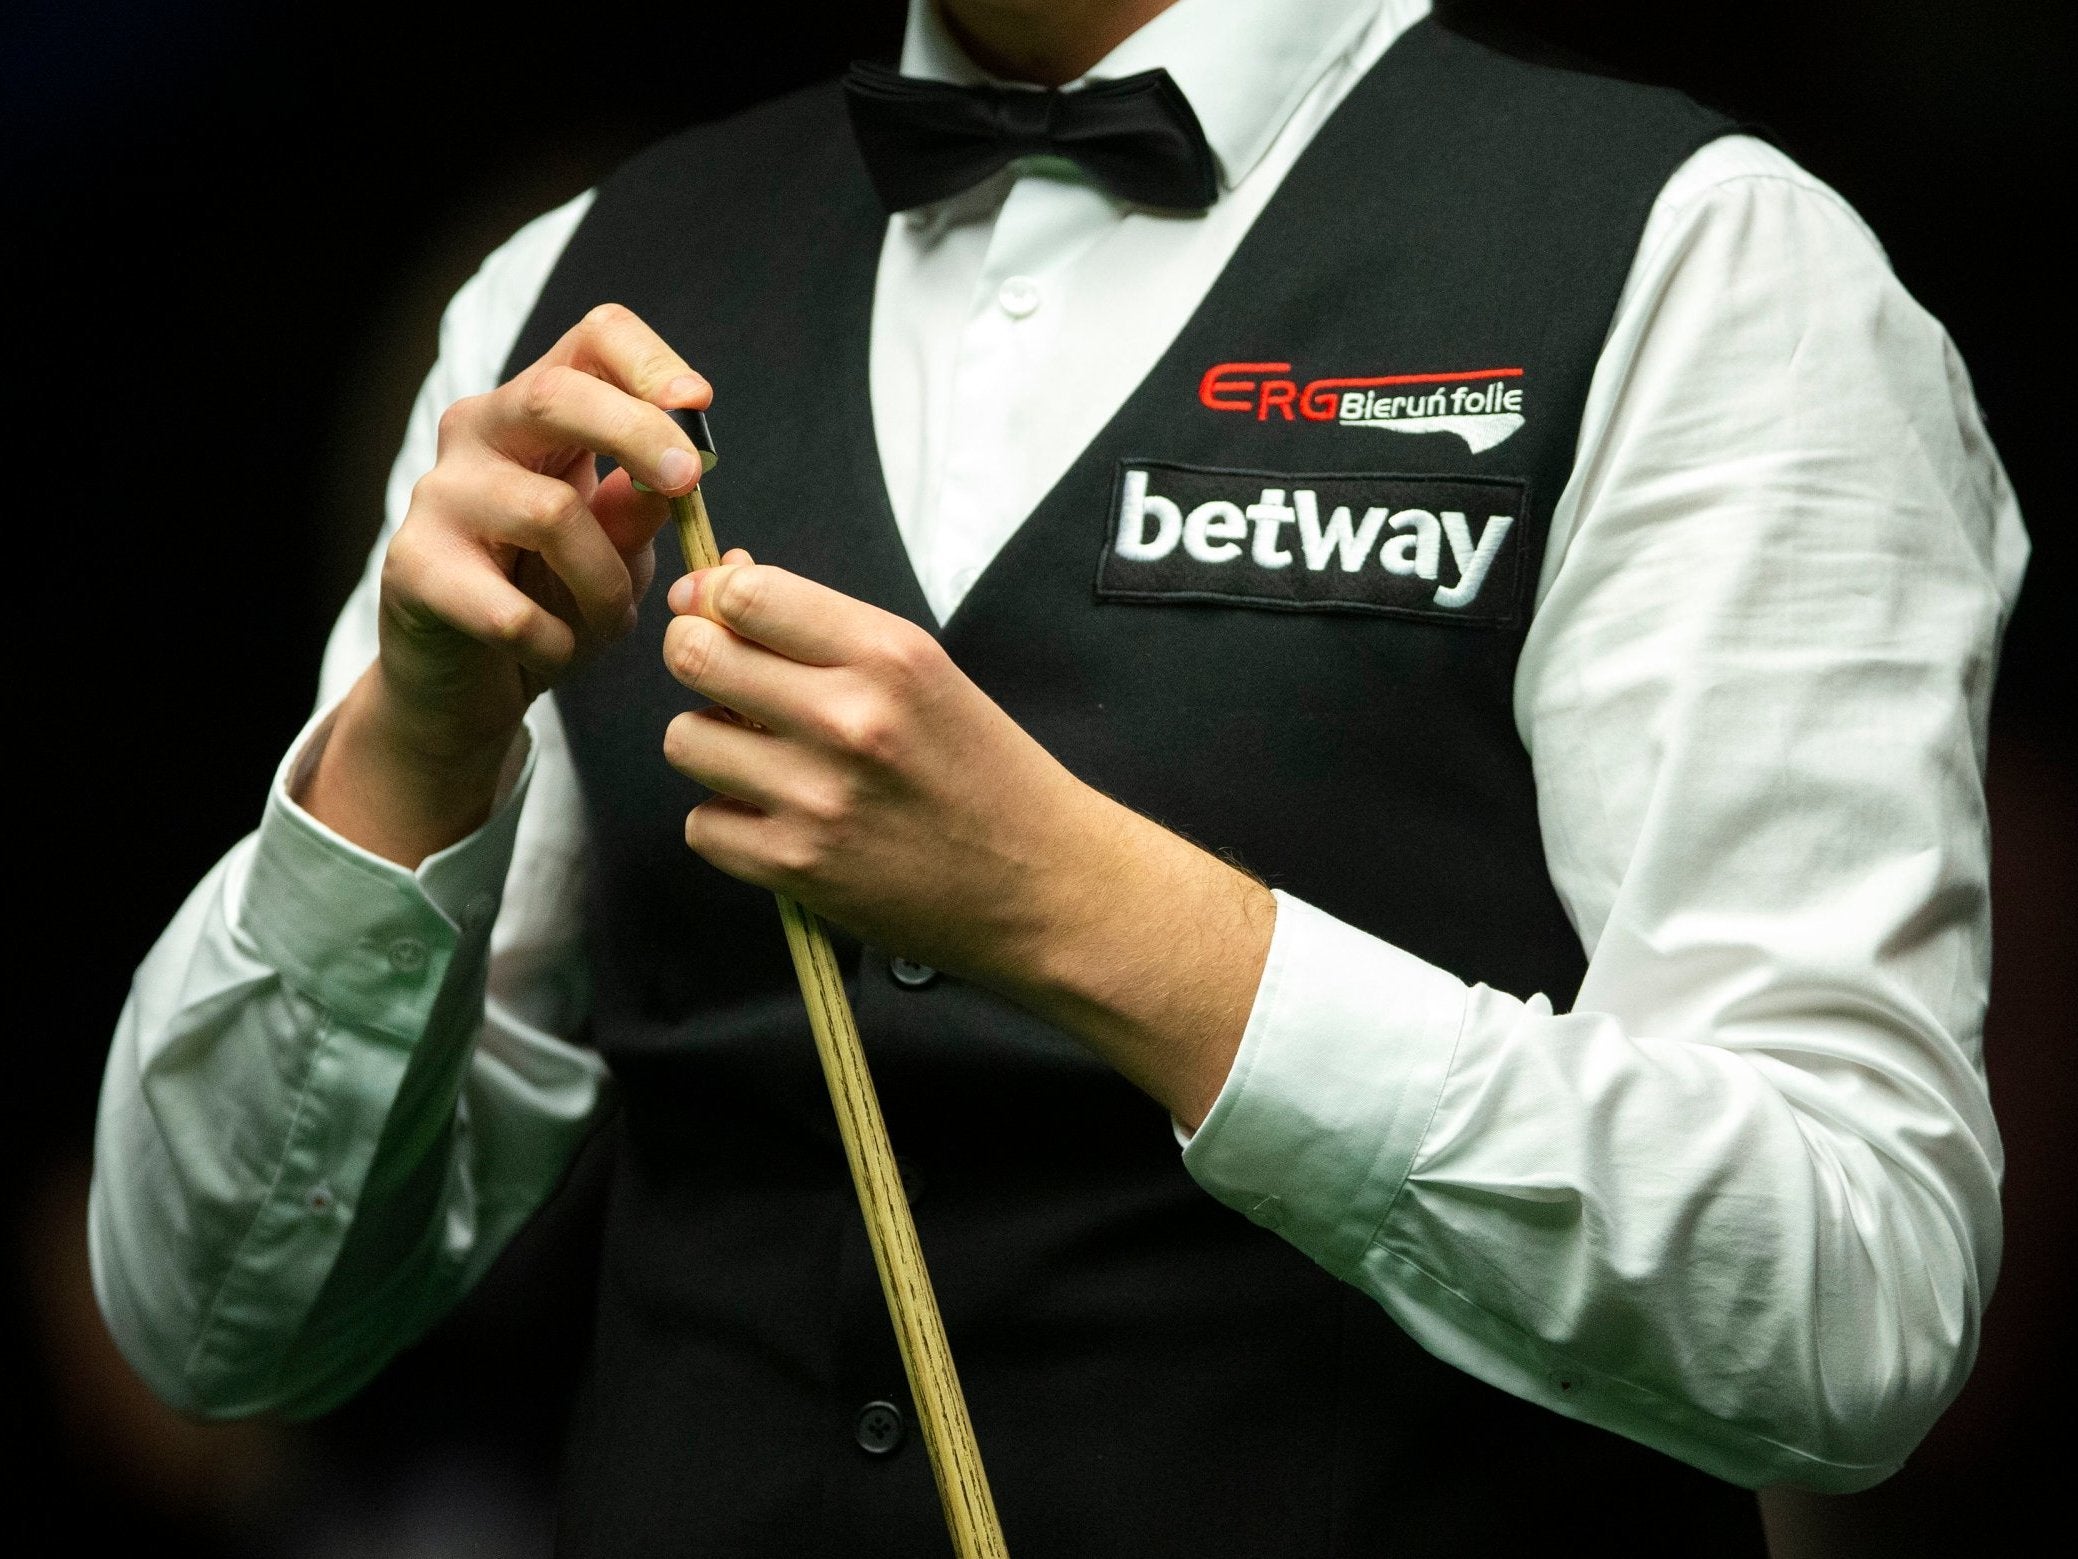 Two snooker players were banned after being found guilty of match-fixing